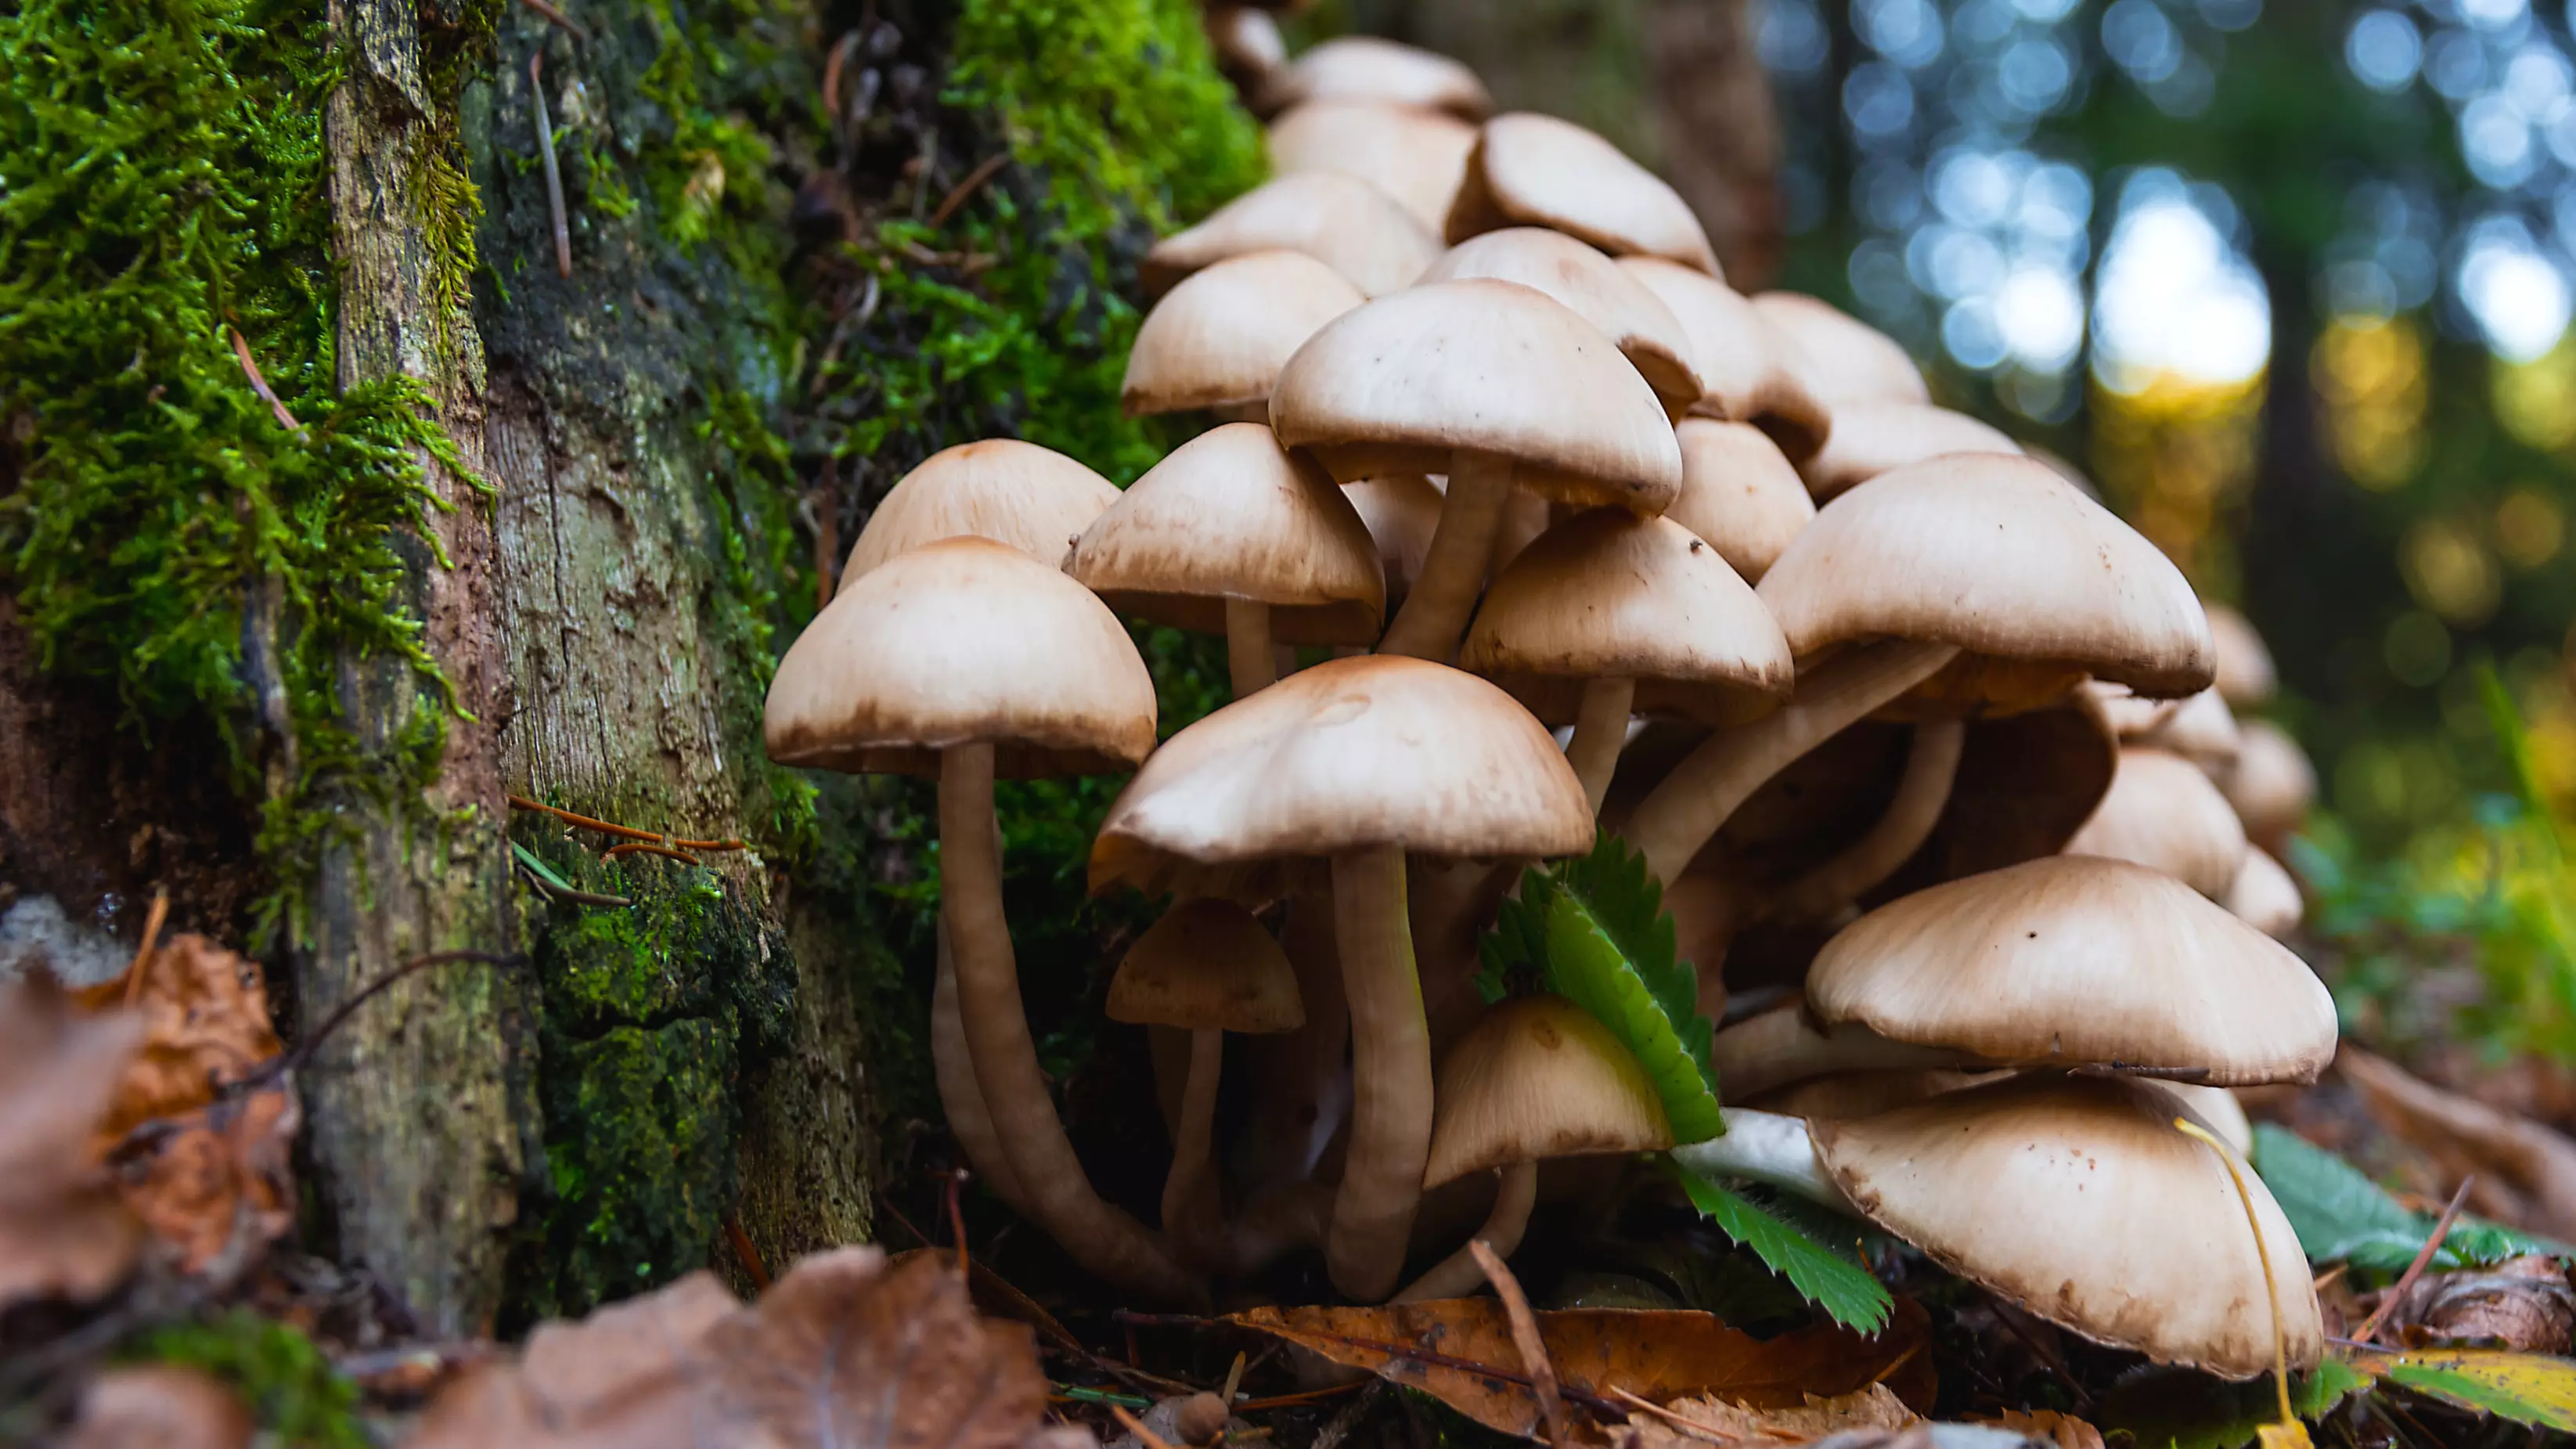 Australia Joins One Of The World's Biggest Studies Into Effects Of Magic Mushrooms